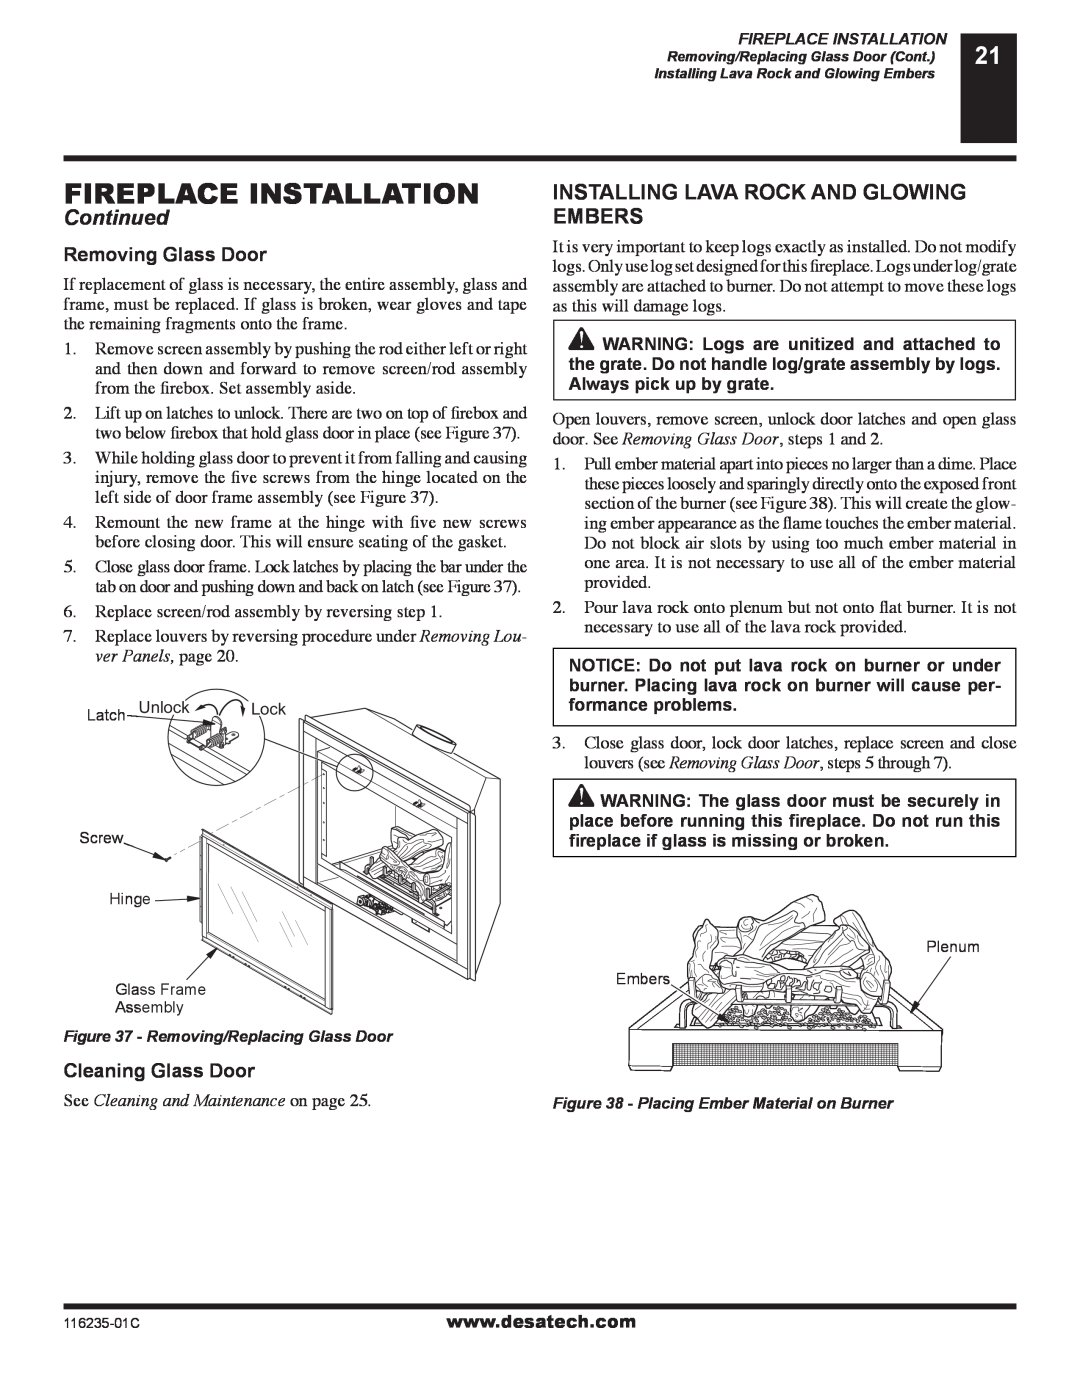 Desa (V)VC36PE, (V)VC36NE installation manual Fireplace Installation, Continued, Removing Glass Door, Cleaning Glass Door 